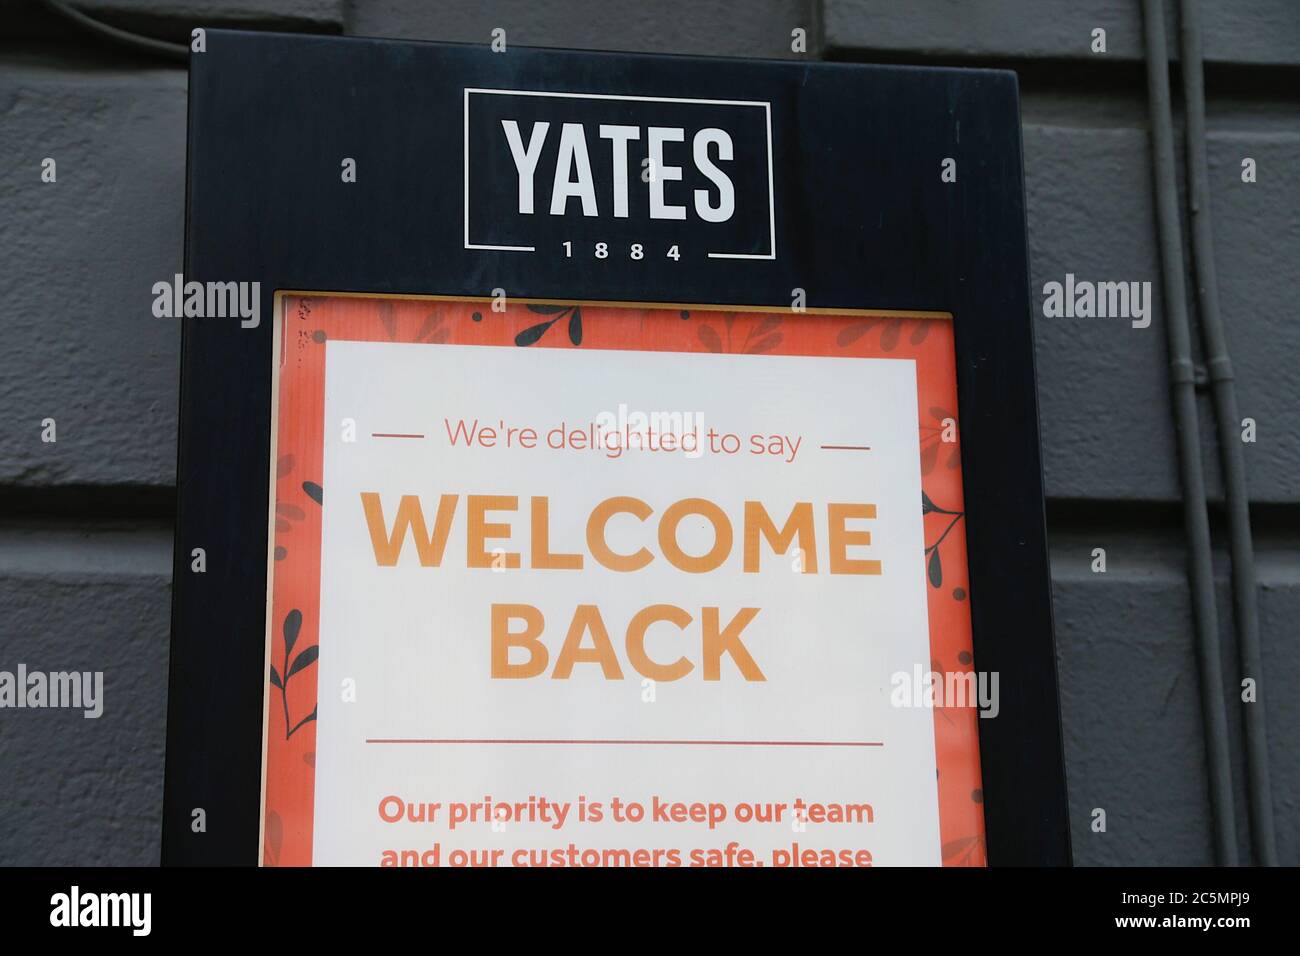 Hastings, East Sussex, UK. 04 Jul, 2020. With the government relaxing the rules further, bars, pubs, restaurants and barbershops are allowed to open. A welcome back sign at the entrance to a bar. Photo Credit: Paul Lawrenson-PAL Media/Alamy Live News Stock Photo